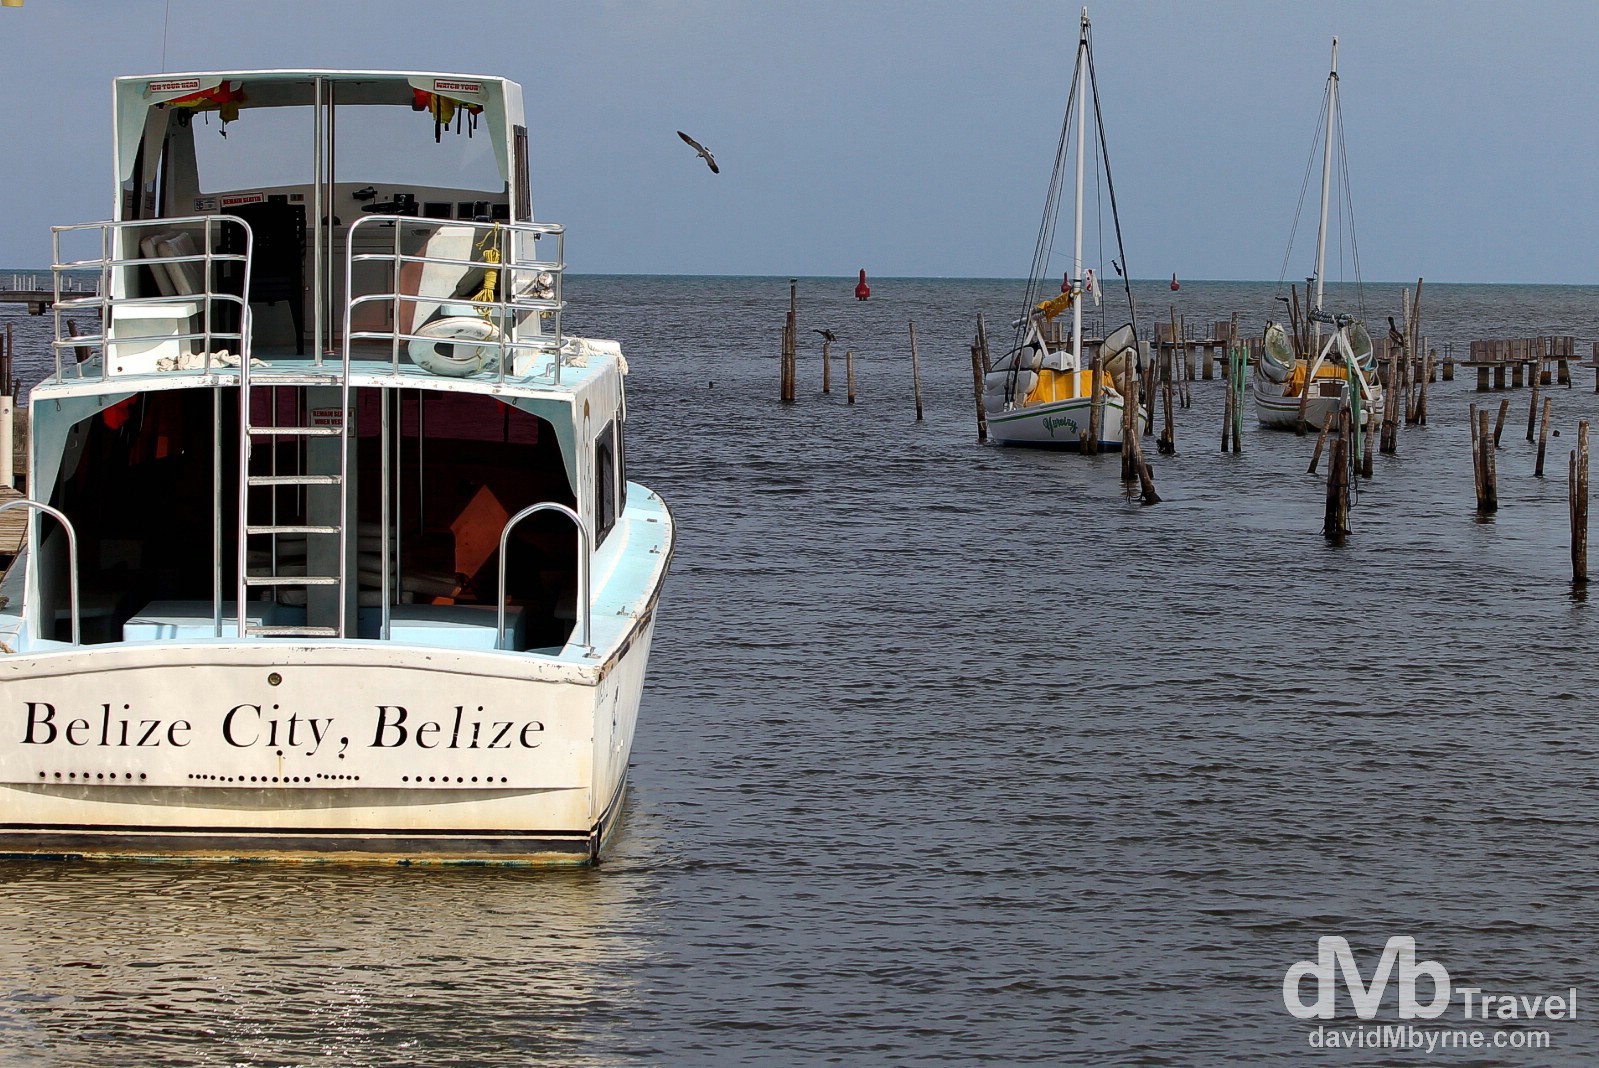 Boats in Haulover Creek, Belize City, Belize. May 12th 2013.